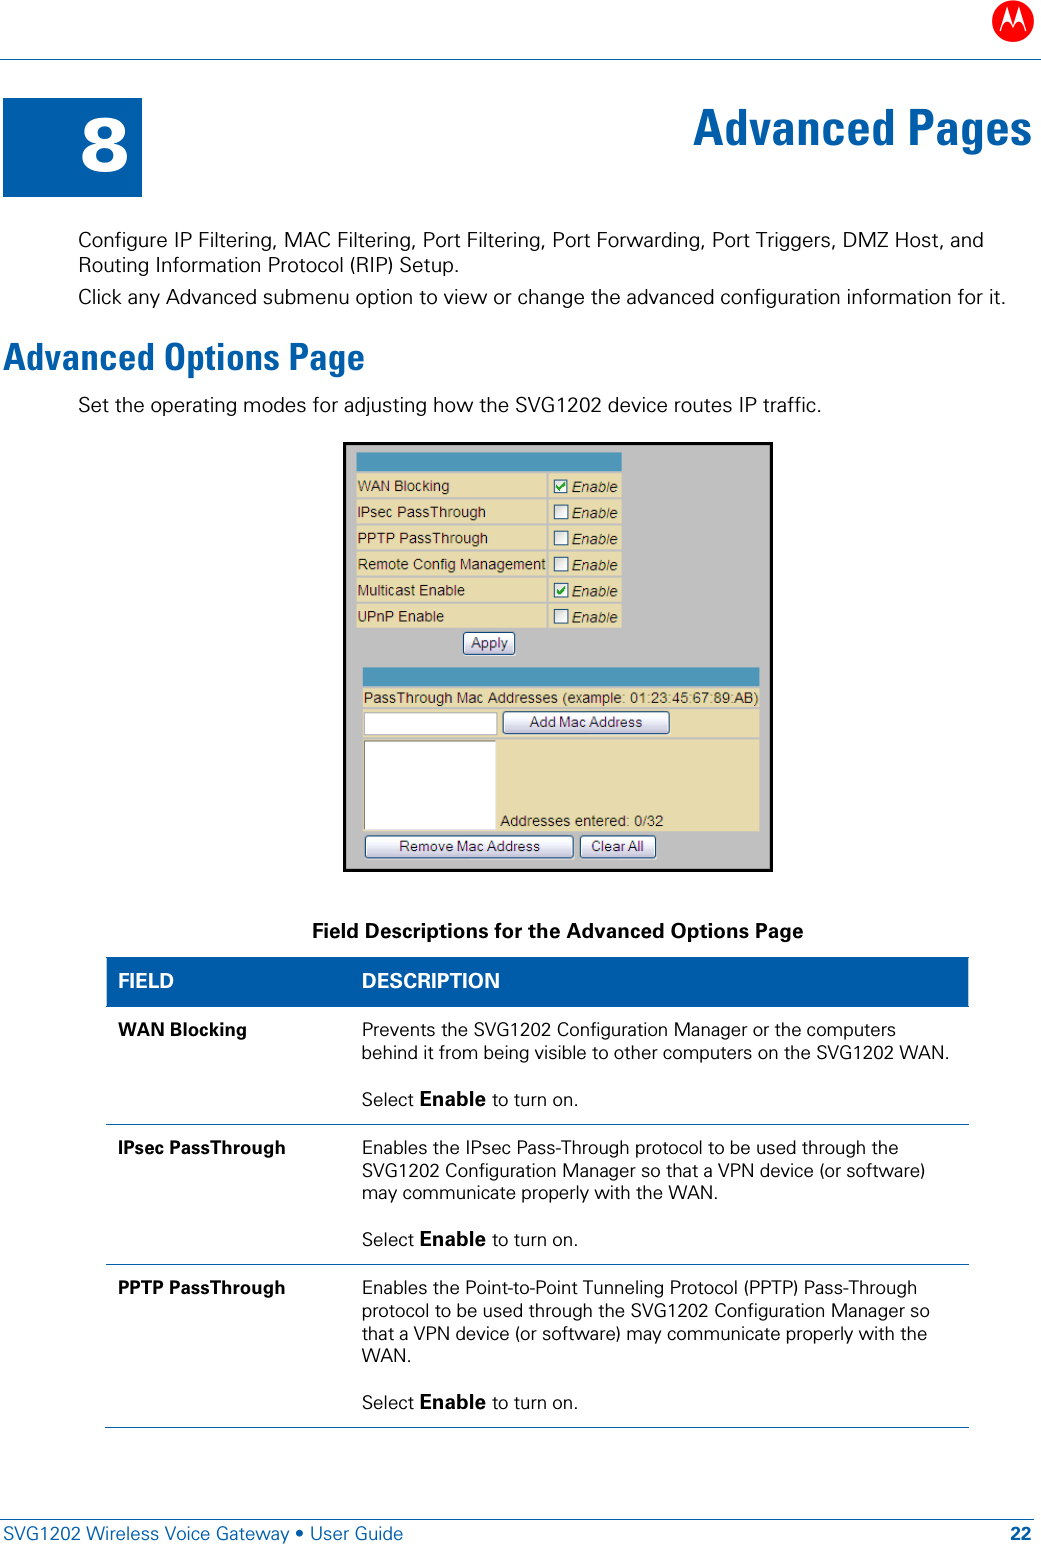 B   SVG1202 Wireless Voice Gateway • User Guide 22  8 Advanced Pages  Configure IP Filtering, MAC Filtering, Port Filtering, Port Forwarding, Port Triggers, DMZ Host, and Routing Information Protocol (RIP) Setup.  Click any Advanced submenu option to view or change the advanced configuration information for it. Advanced Options Page Set the operating modes for adjusting how the SVG1202 device routes IP traffic.   Field Descriptions for the Advanced Options Page FIELD  DESCRIPTION WAN Blocking Prevents the SVG1202 Configuration Manager or the computers behind it from being visible to other computers on the SVG1202 WAN.  Select Enable to turn on. IPsec PassThrough Enables the IPsec Pass-Through protocol to be used through the SVG1202 Configuration Manager so that a VPN device (or software) may communicate properly with the WAN.  Select Enable to turn on. PPTP PassThrough Enables the Point-to-Point Tunneling Protocol (PPTP) Pass-Through protocol to be used through the SVG1202 Configuration Manager so that a VPN device (or software) may communicate properly with the WAN.  Select Enable to turn on. 